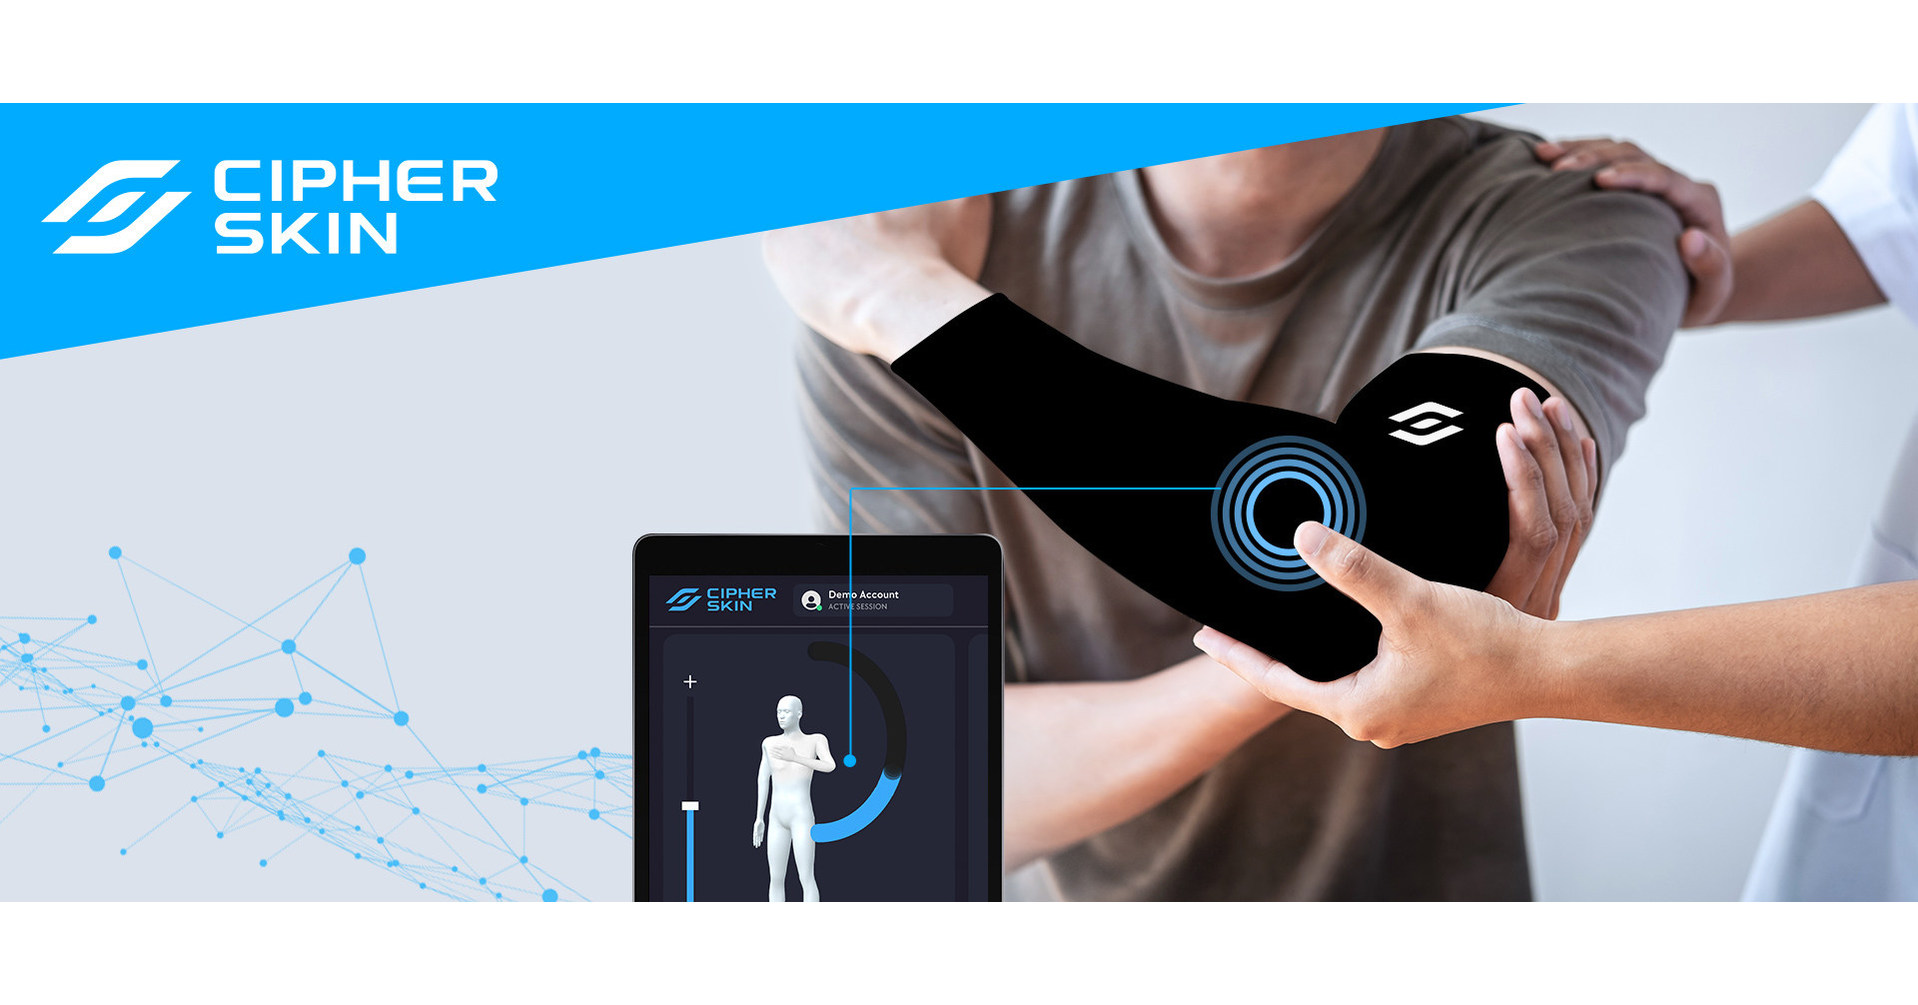 Striveworks and Cipher Skin Partner to Provide Deeper Analytics for Physical Therapy Patients